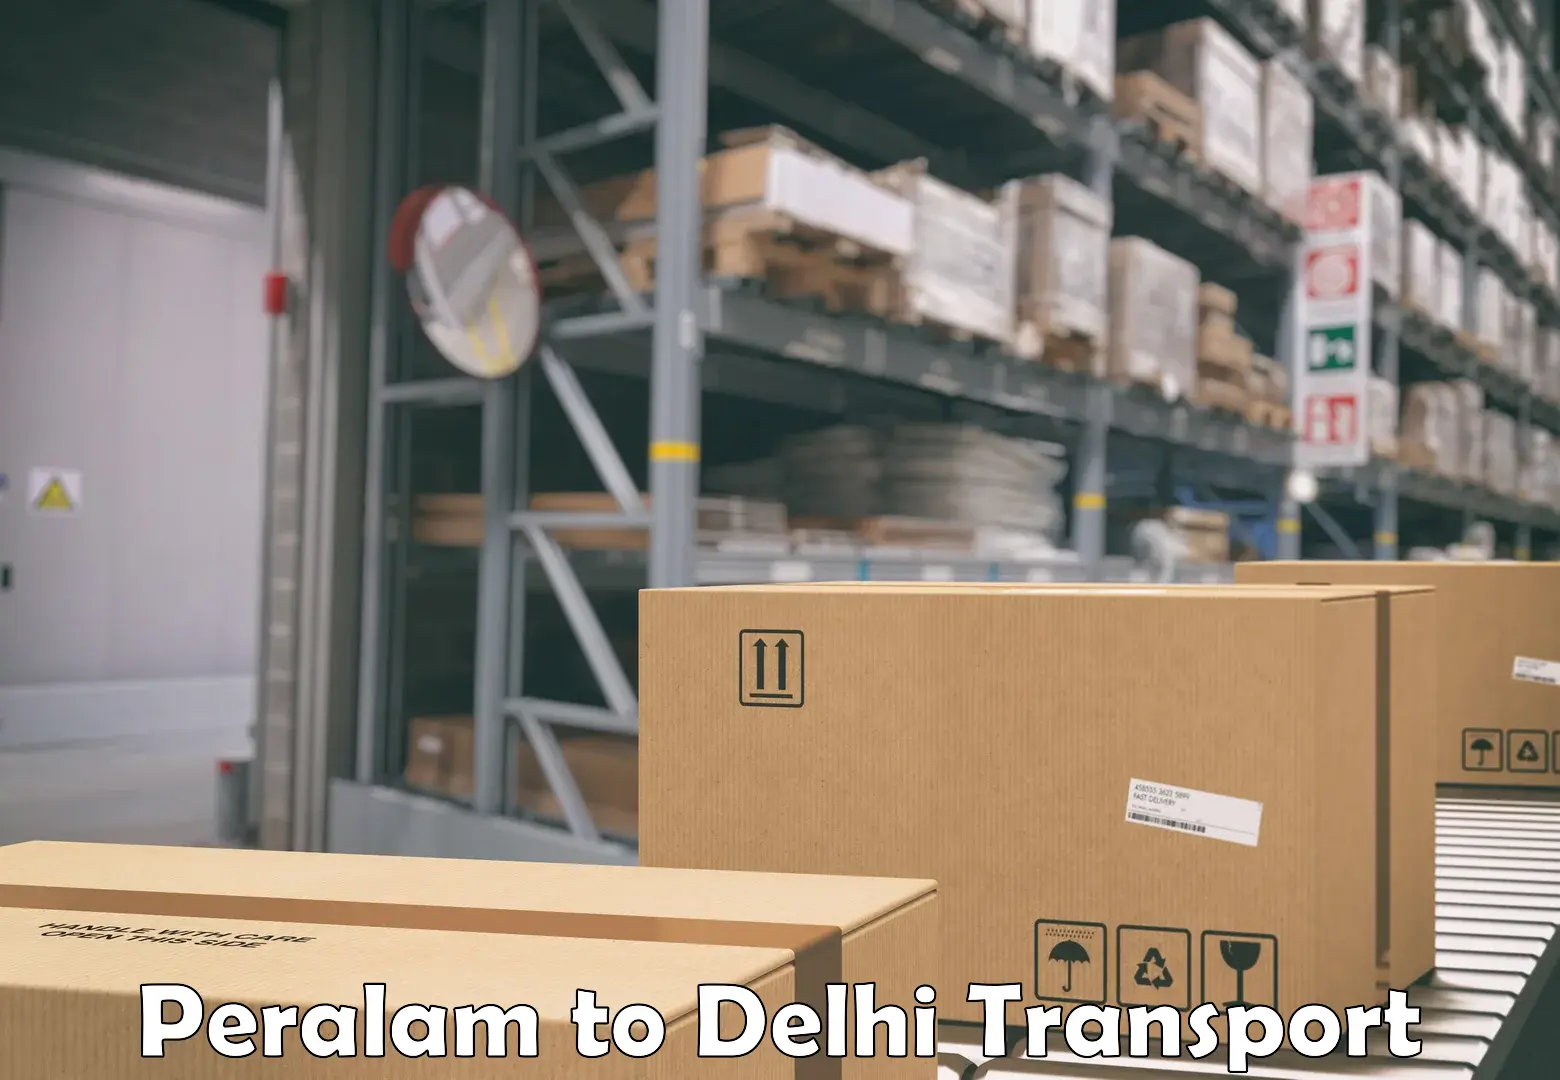 Daily parcel service transport Peralam to Delhi